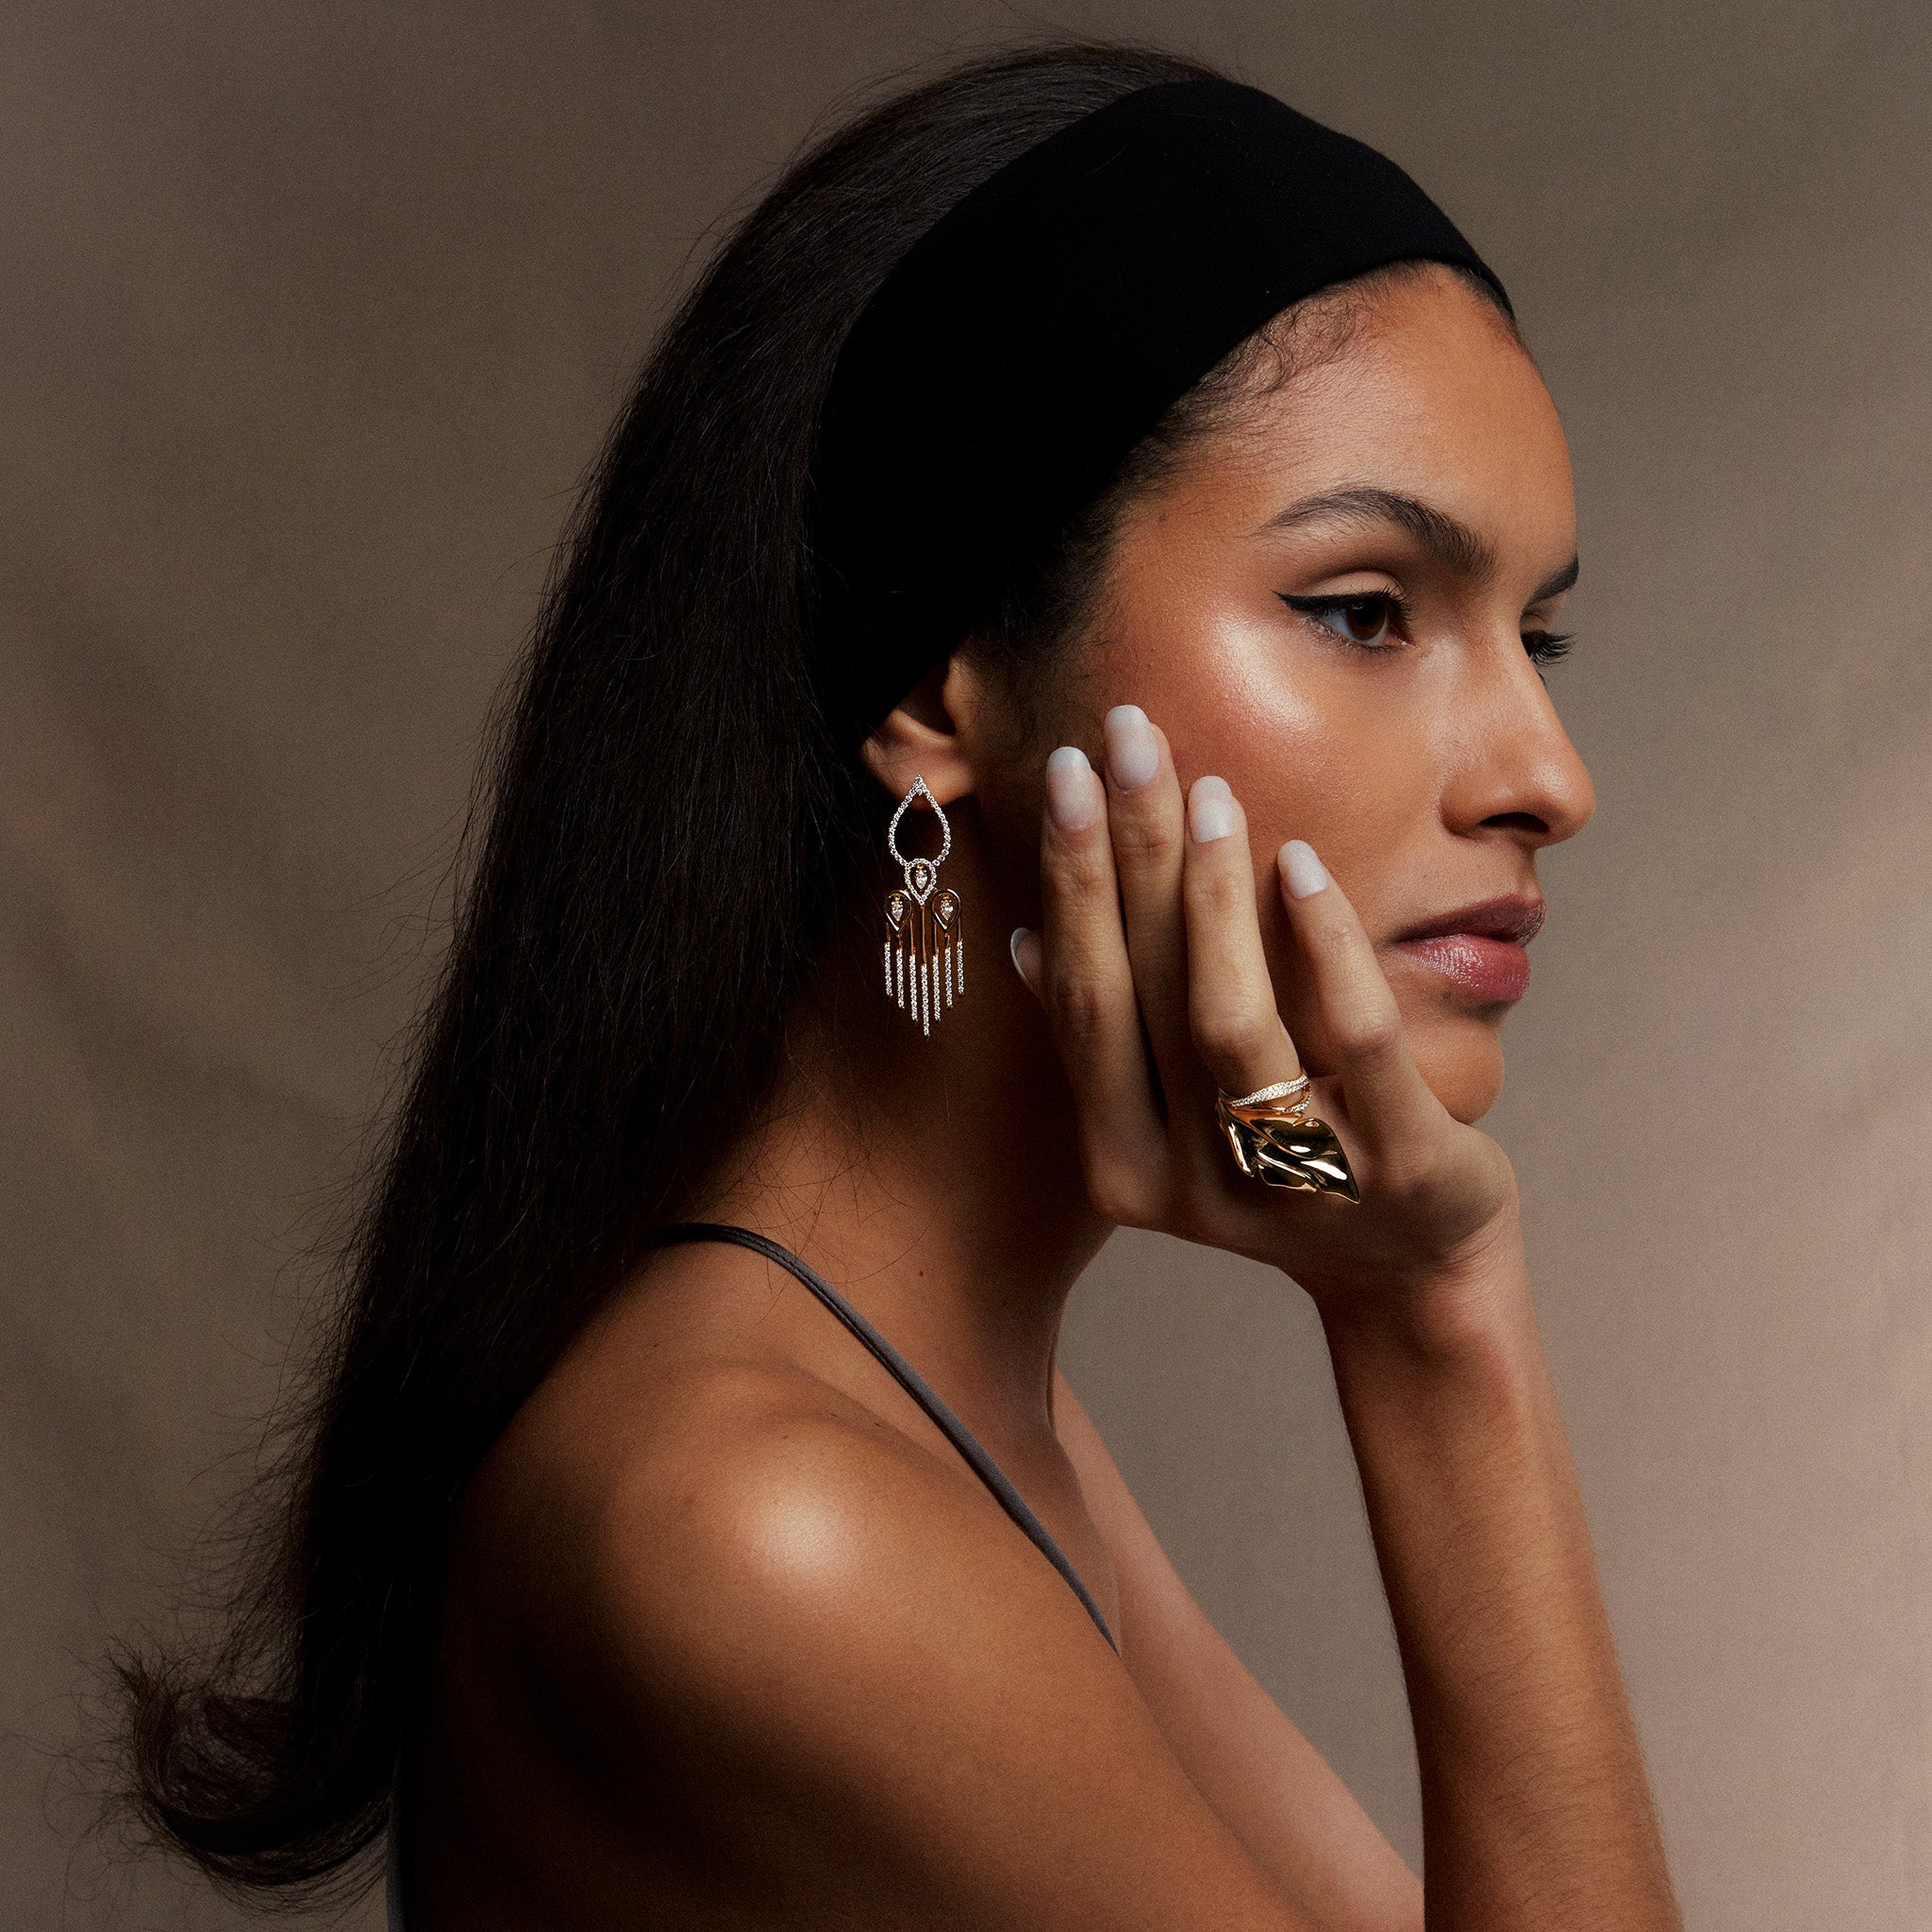 Sahara yellow gold earrings adorned with white diamonds, displayed on model.